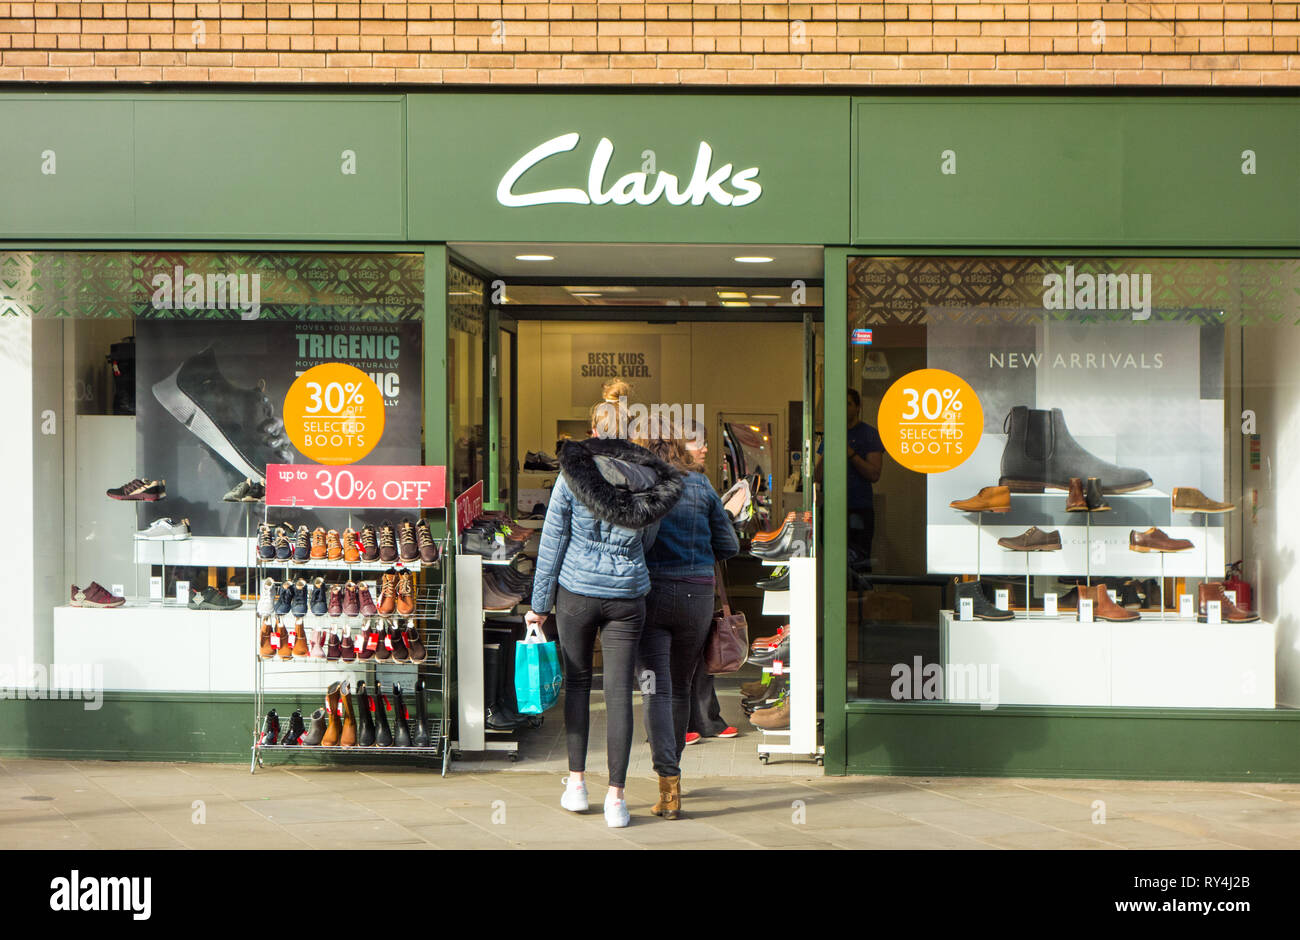 clarks shoes plymouth